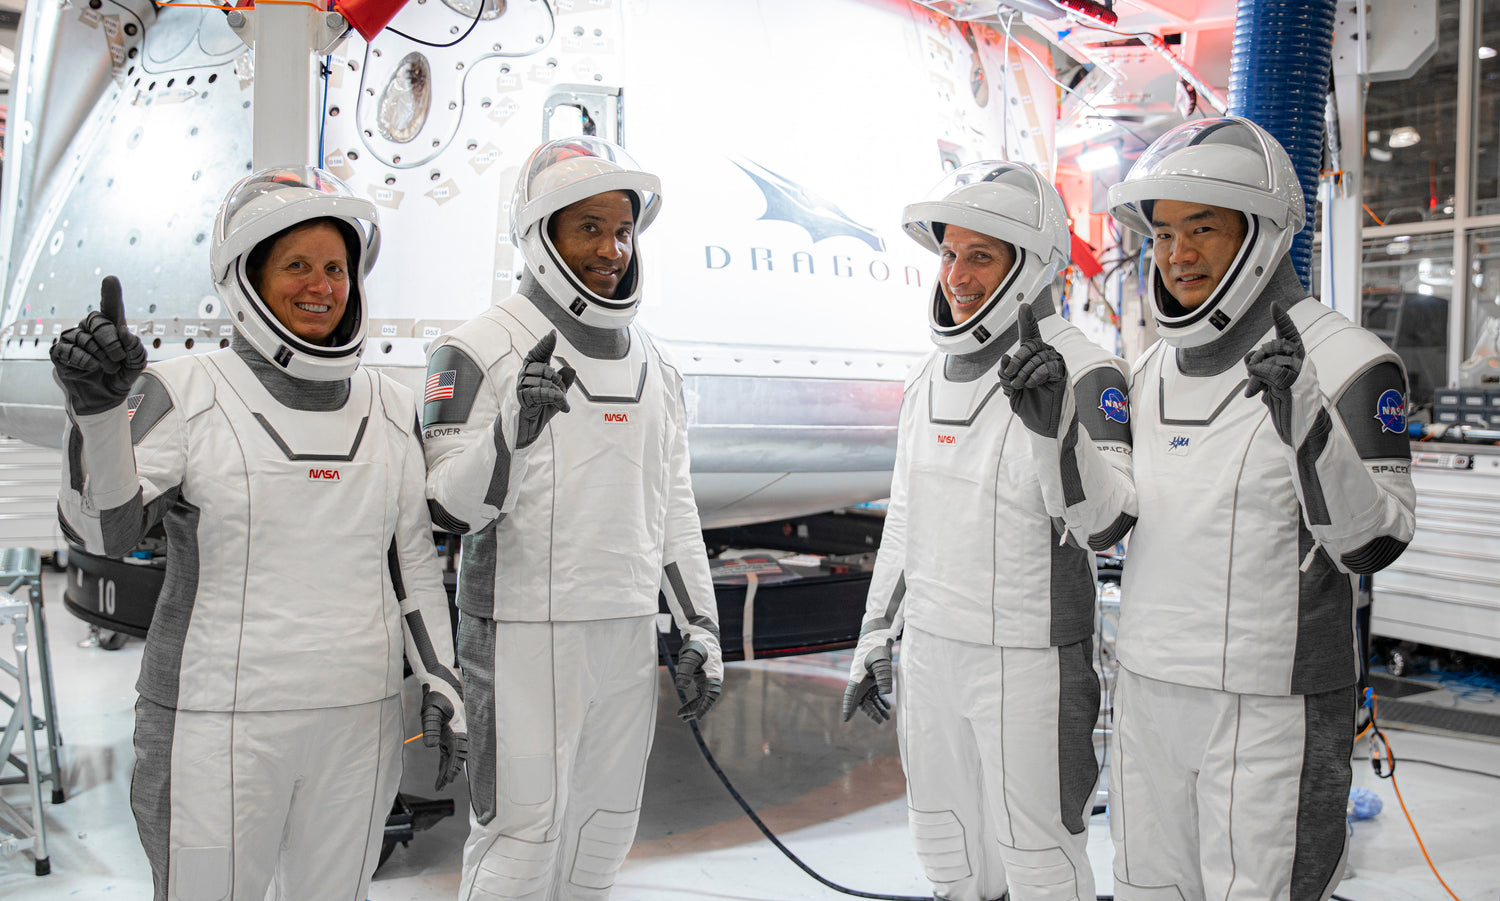 SpaceX Crew-1 Astronauts give a special name to the next Crew Dragon that will take flight